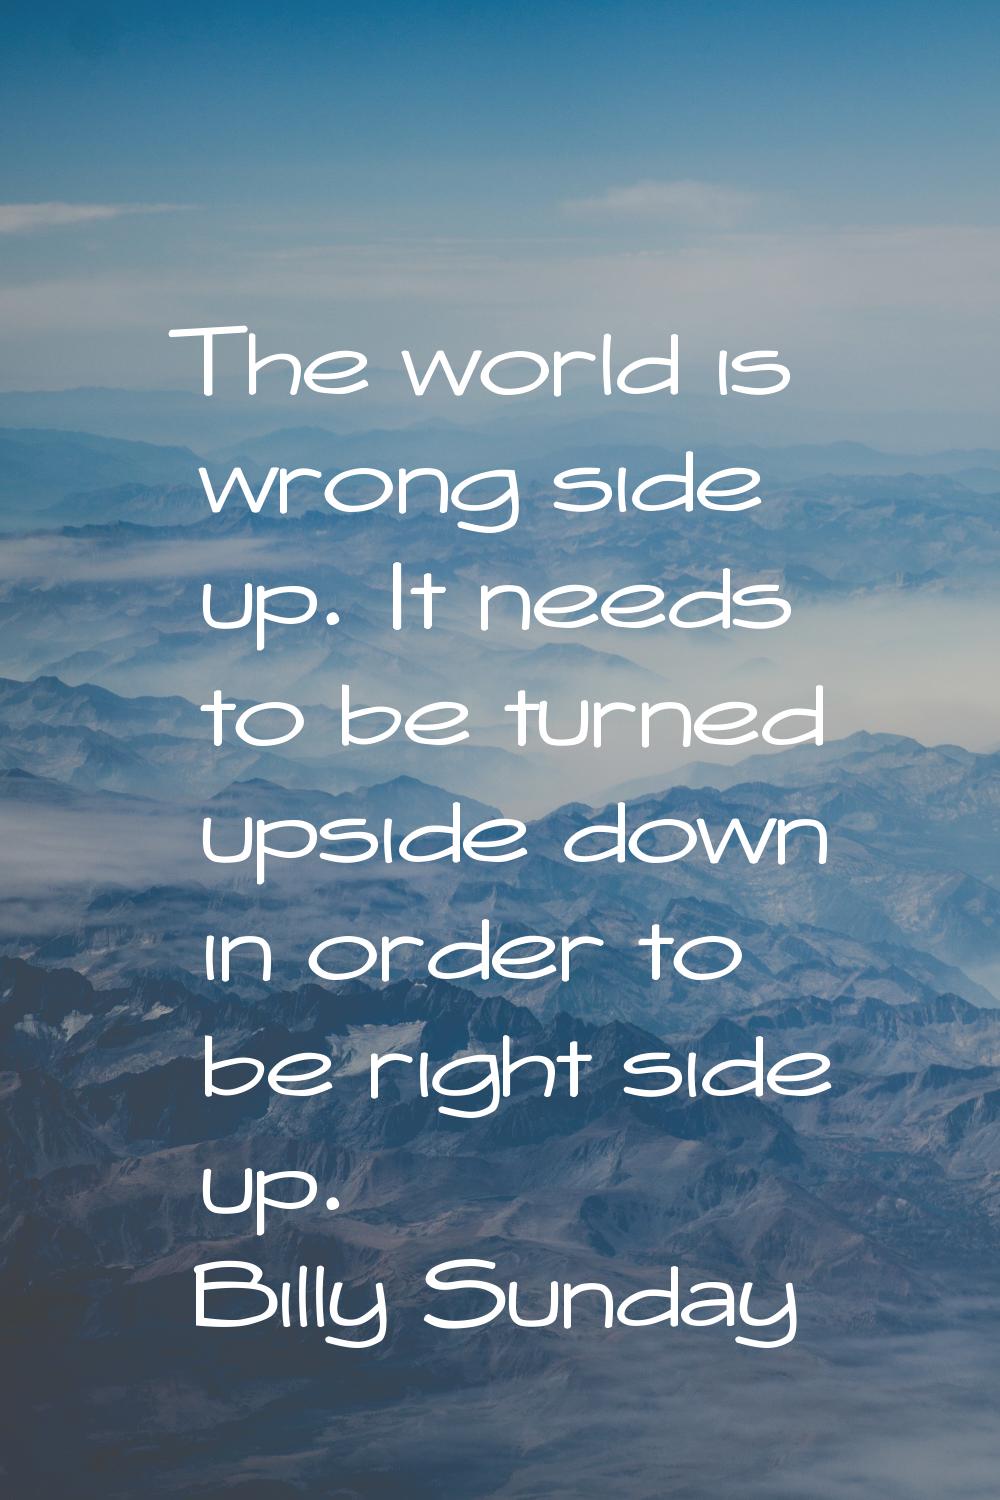 The world is wrong side up. It needs to be turned upside down in order to be right side up.